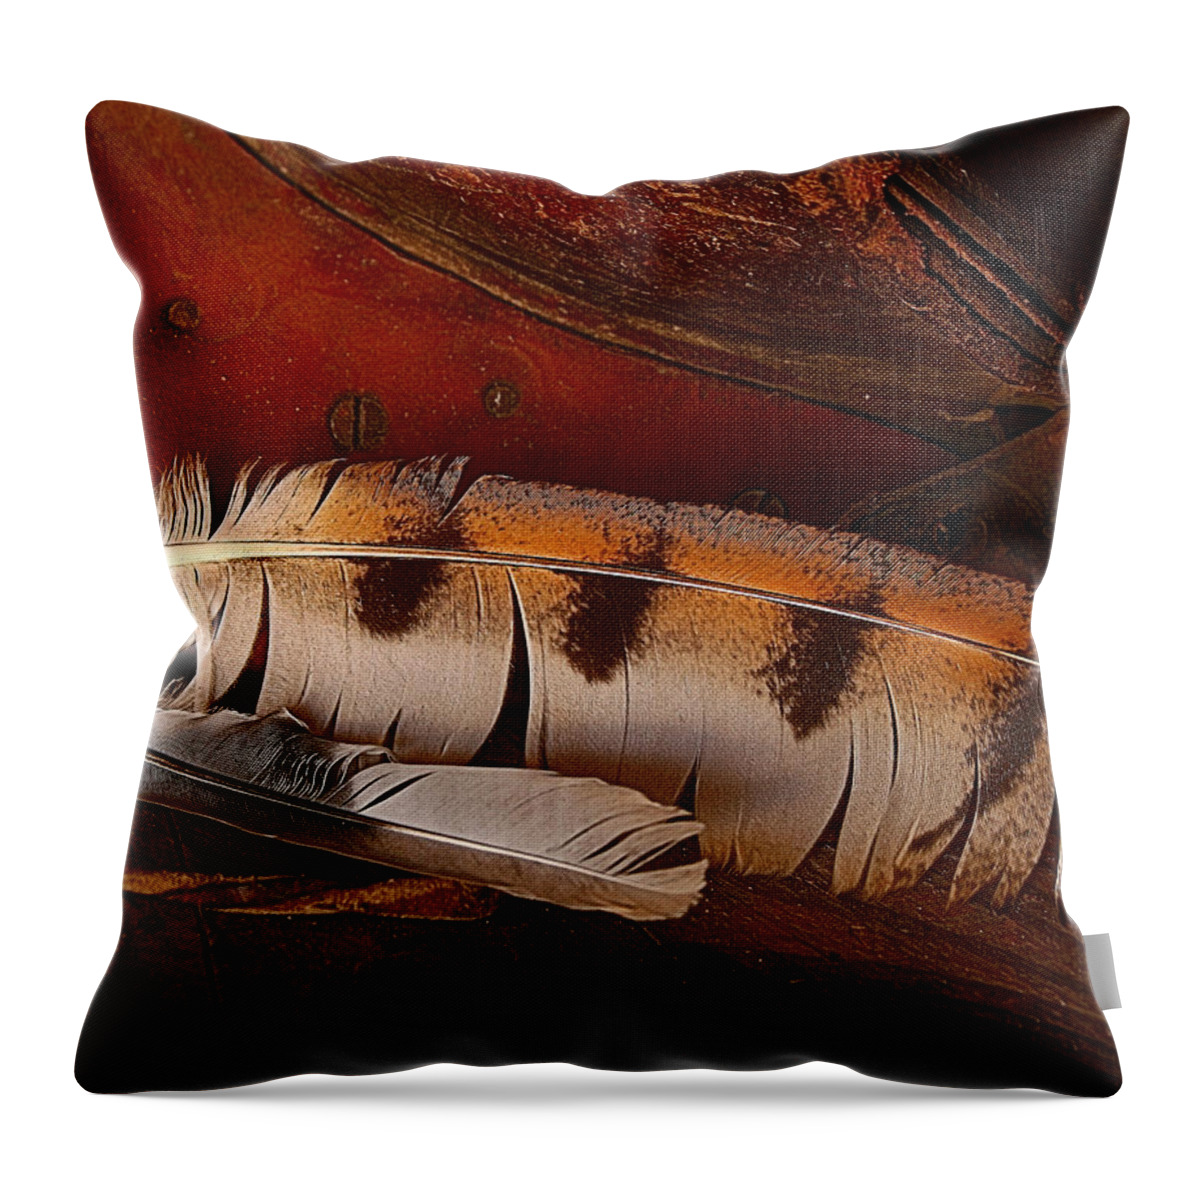 Still Life Throw Pillow featuring the photograph Feather and Leather by Steven Reed